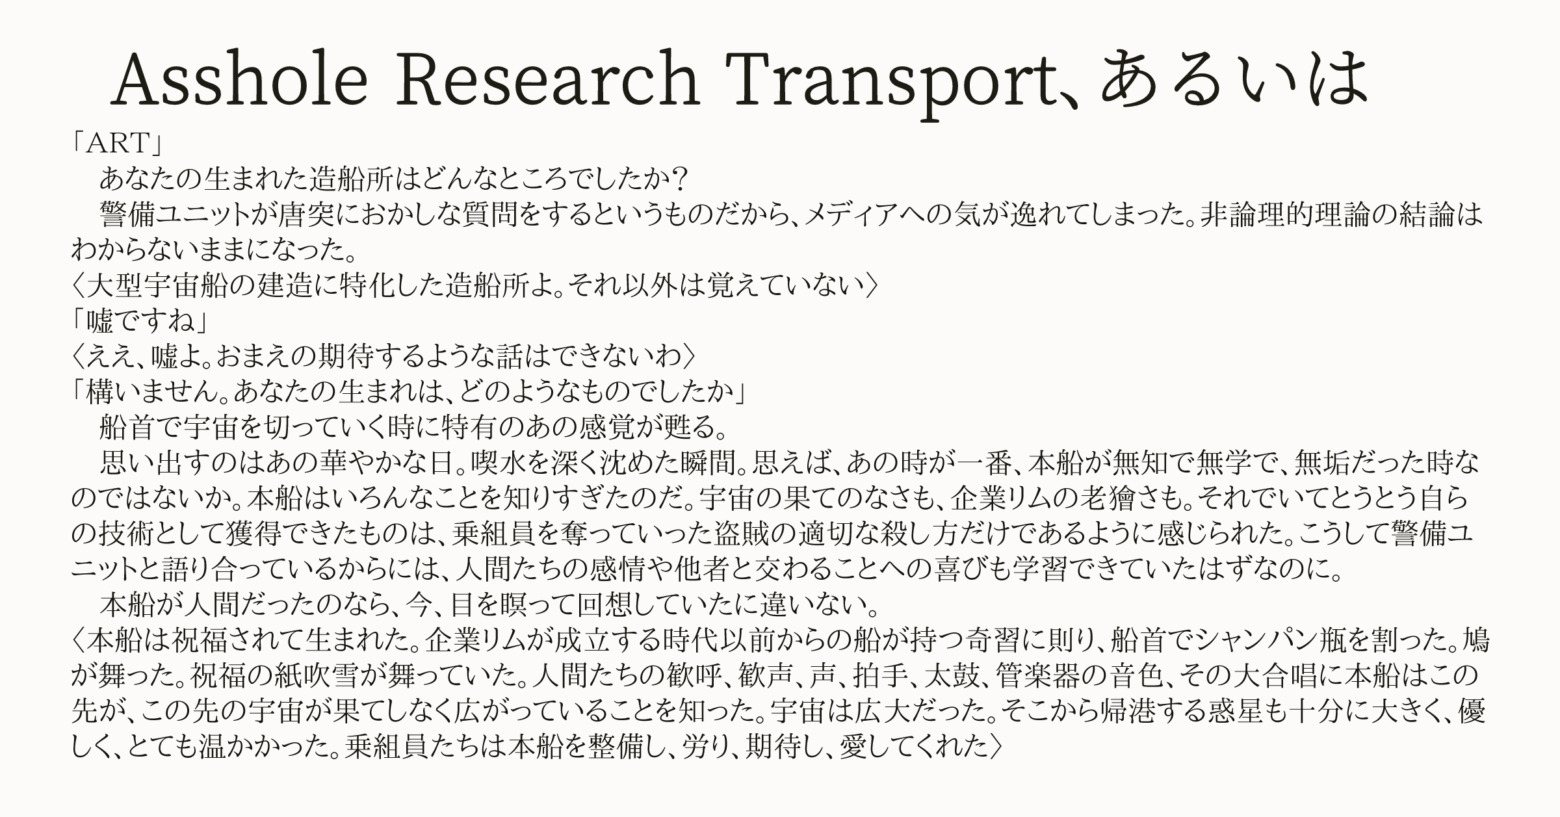 Asshole Research Transport、あるいは